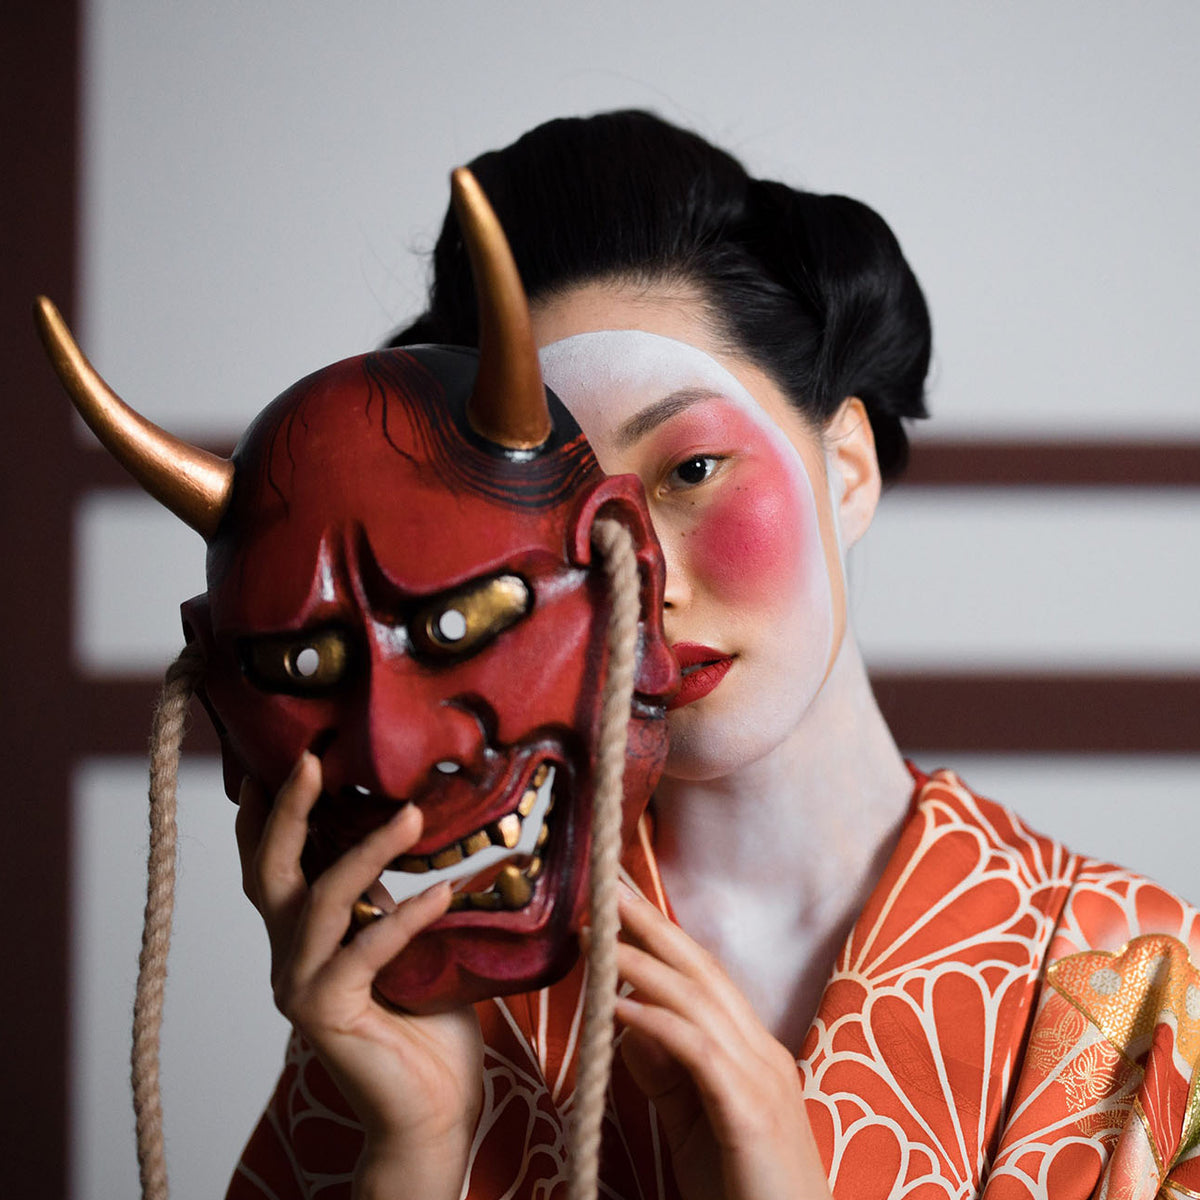 A Journey into the myriad masks of Japan's Folklore